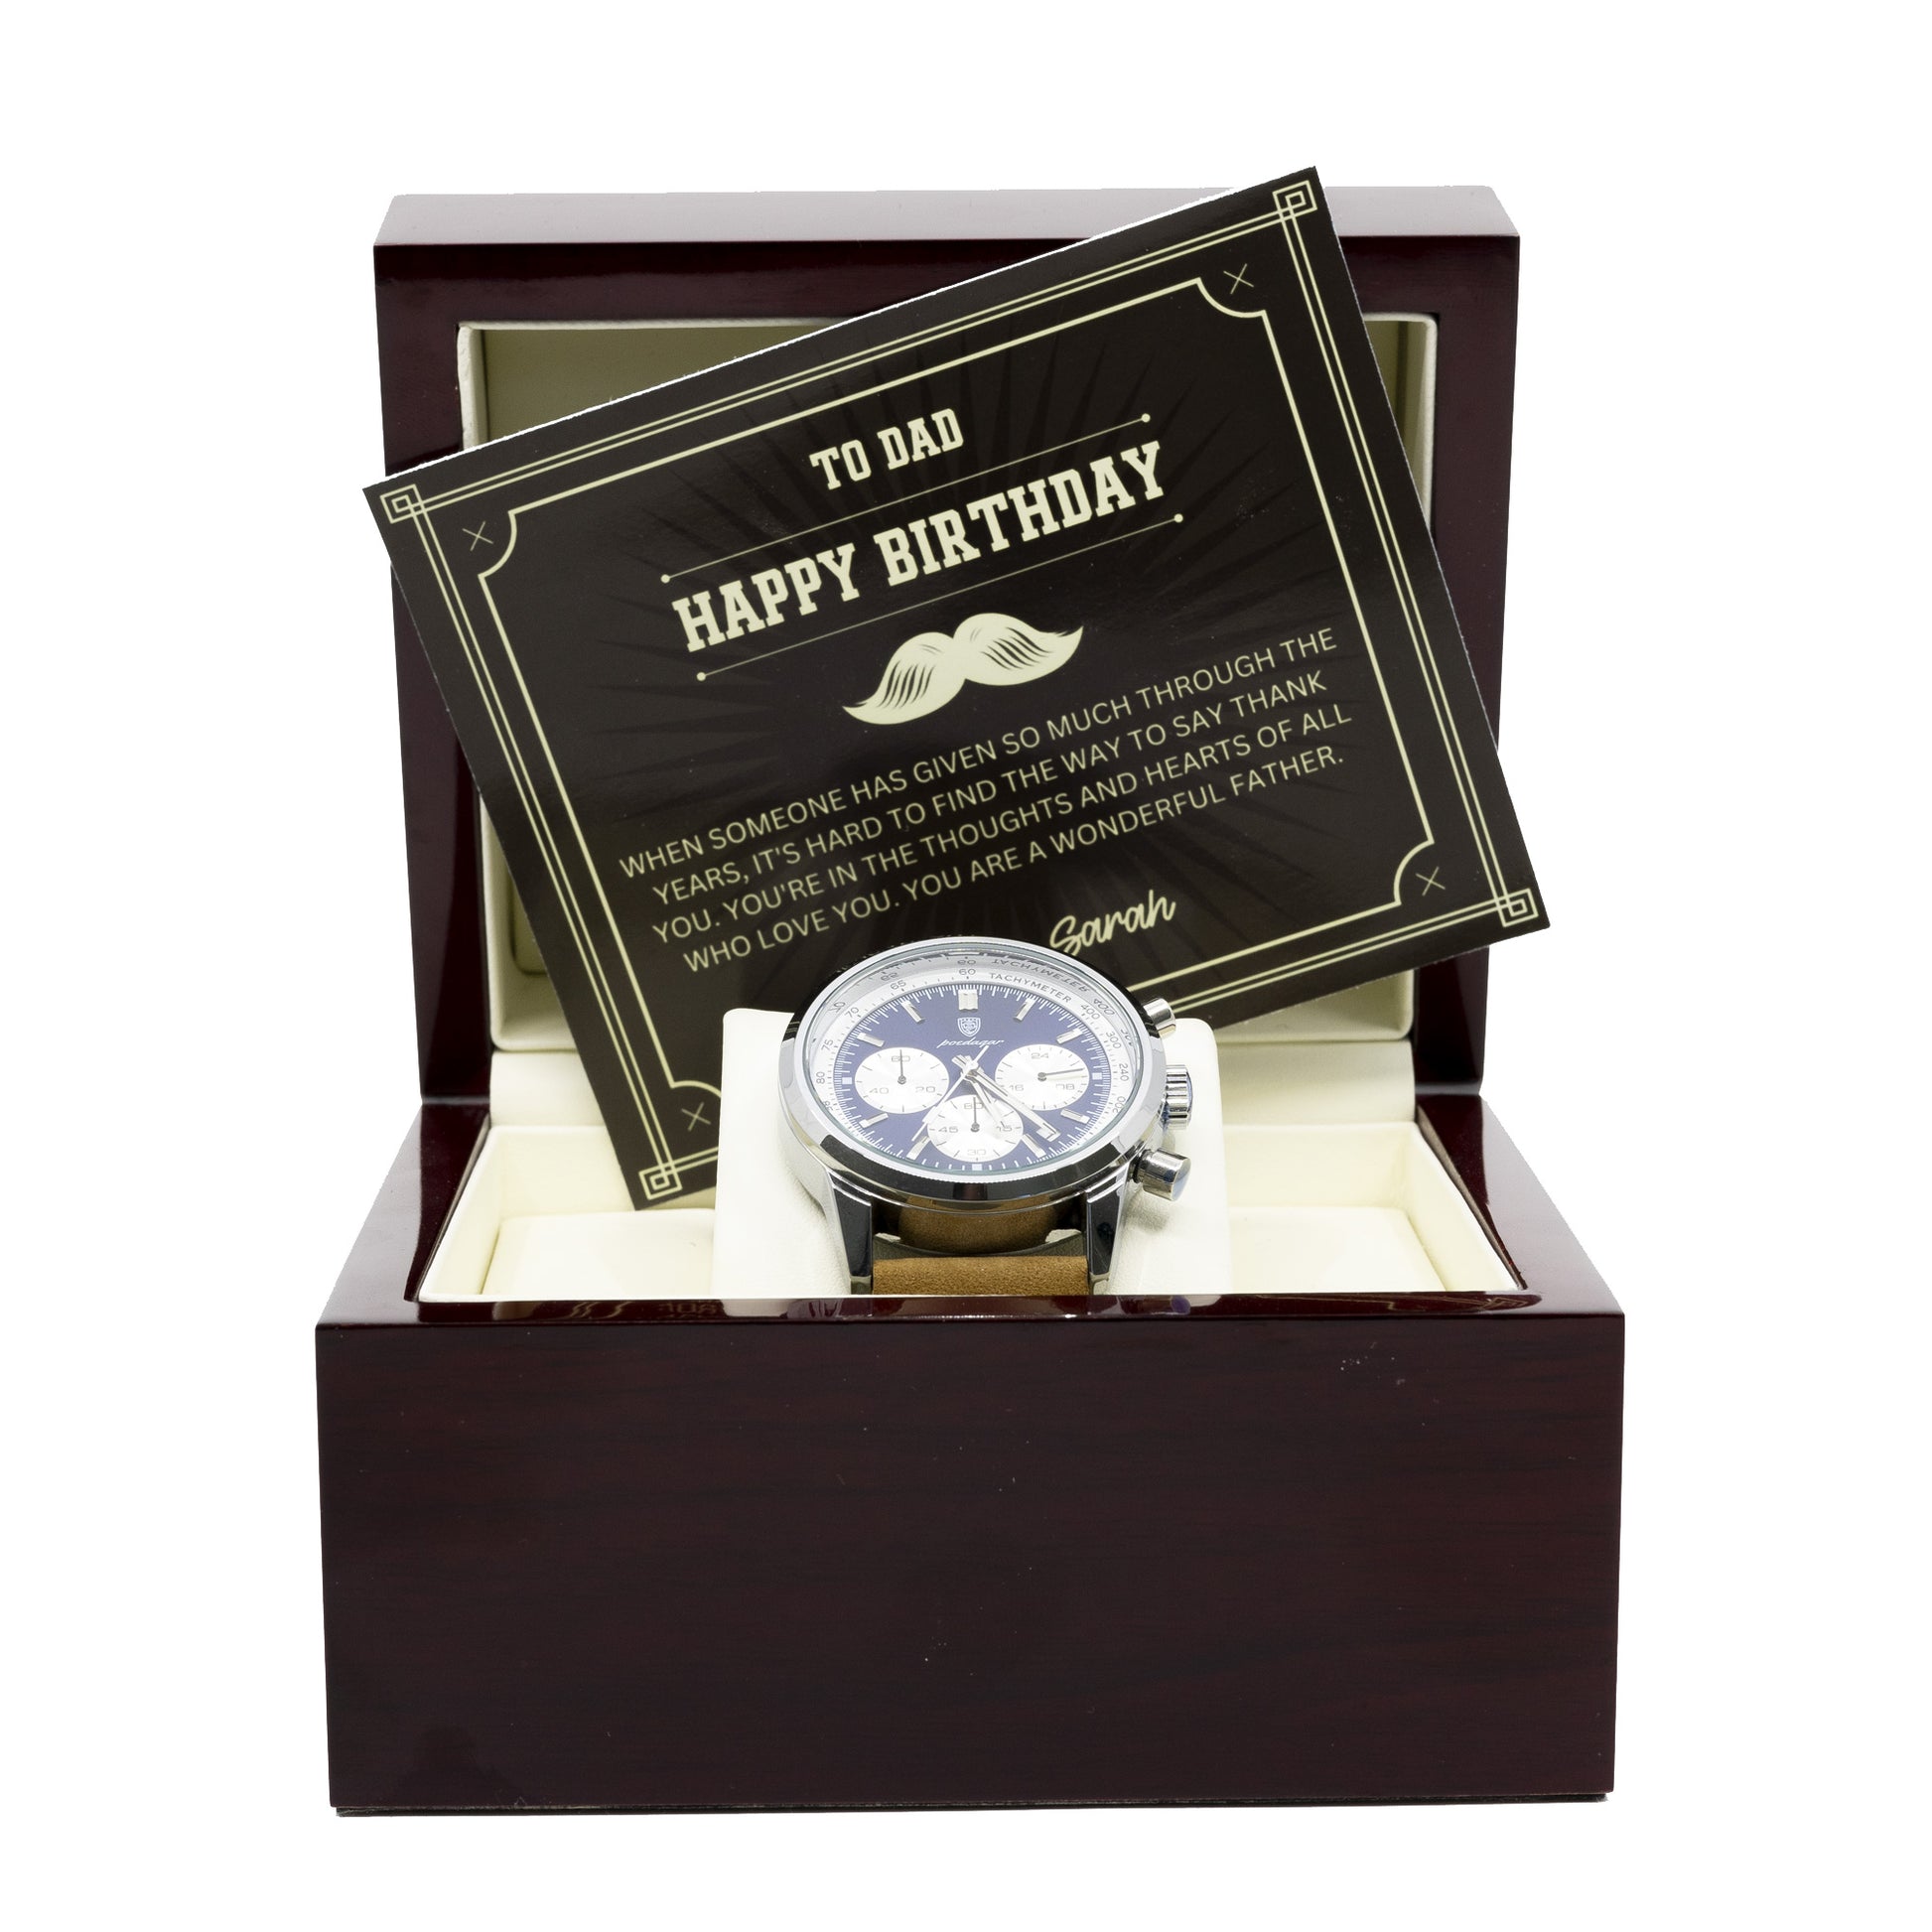 To My Dad - Happy Birthday - Luxury Watch Gift Set With Custom Message Card In Mahogany Box - Gift For Dad